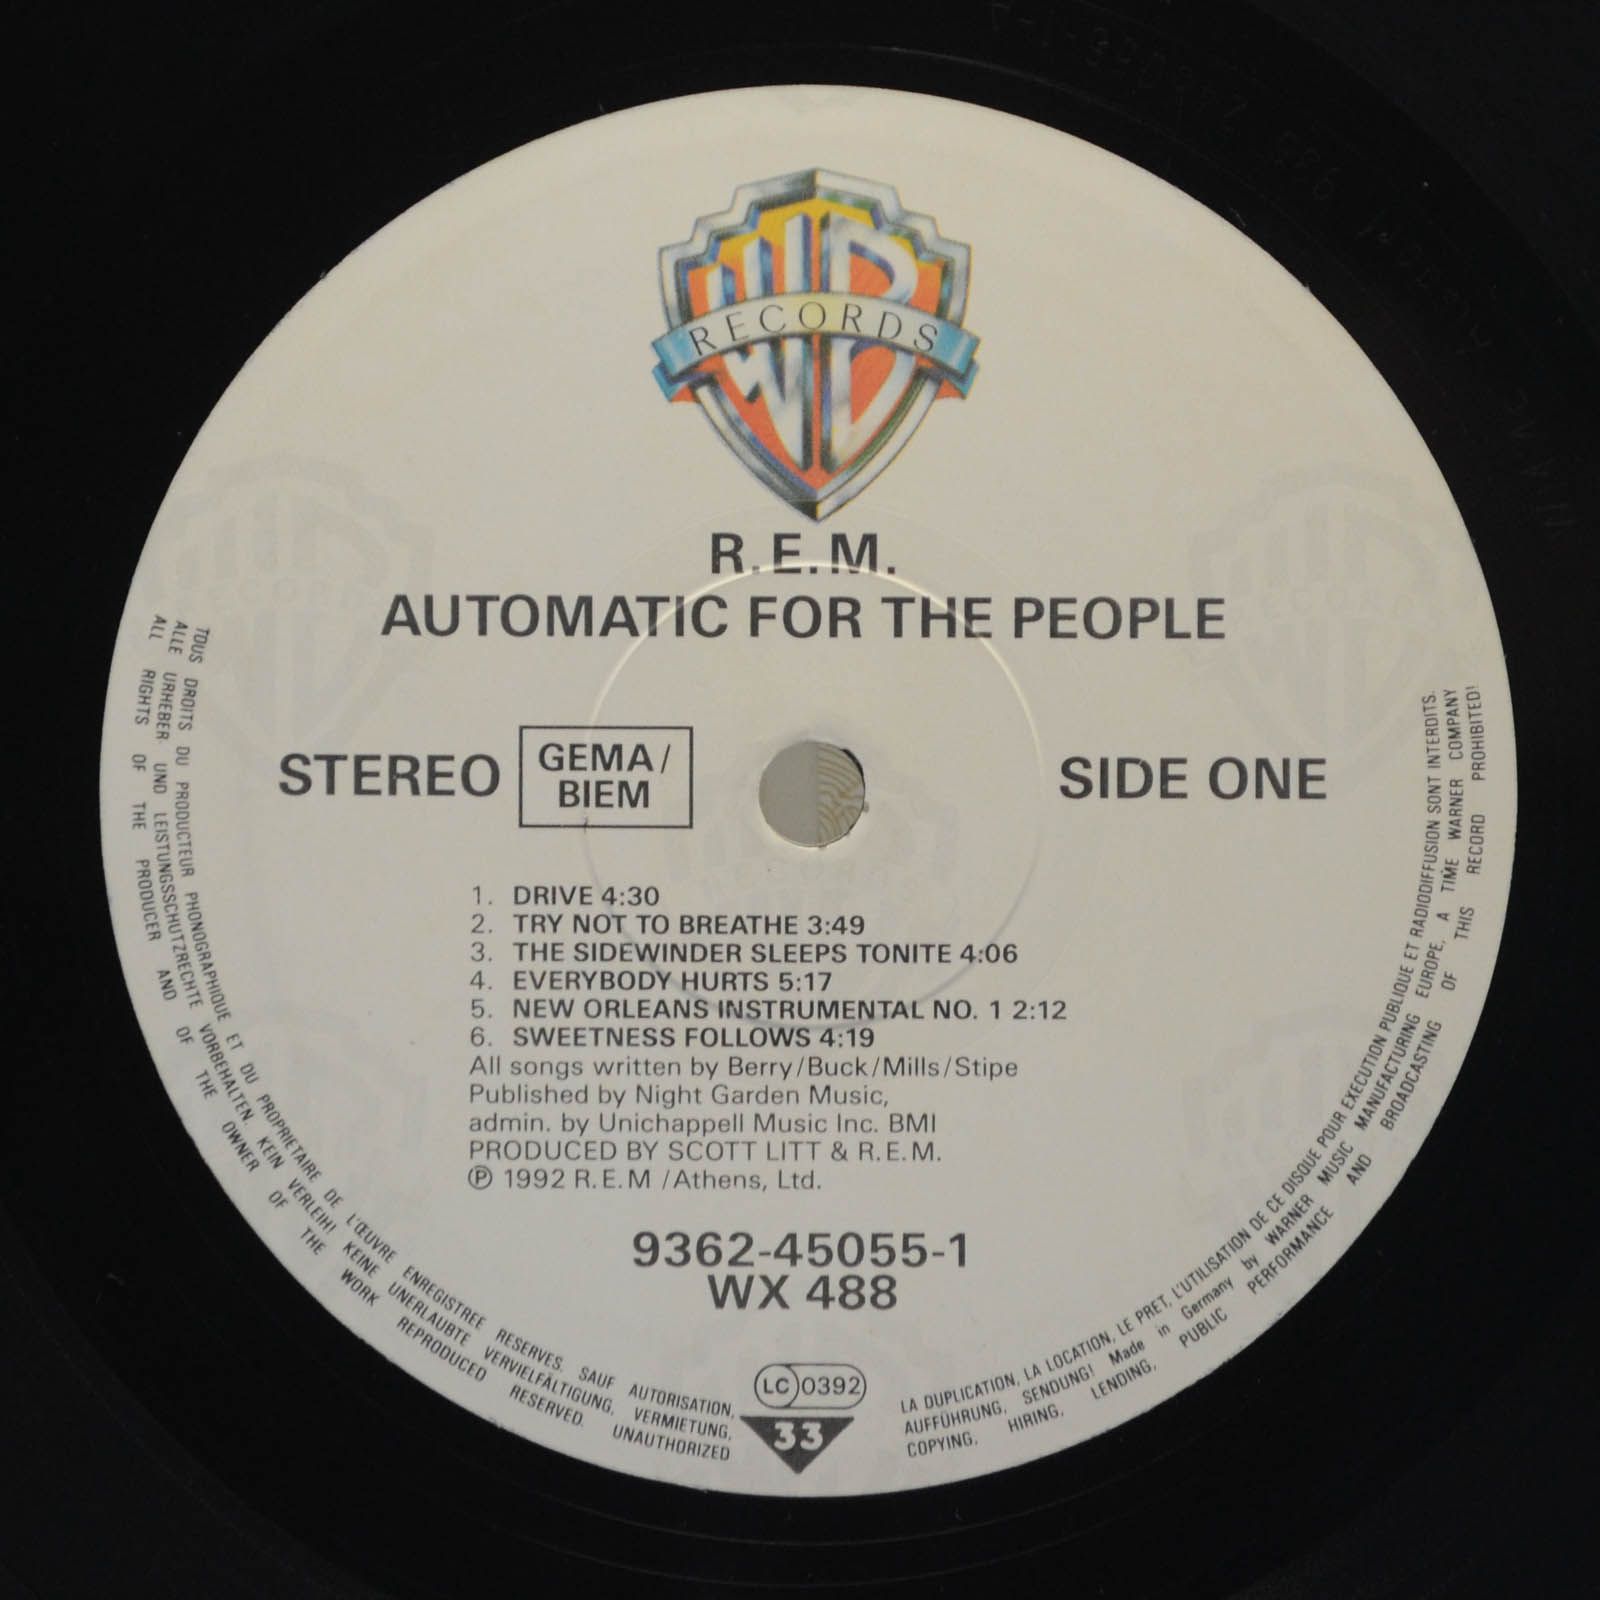 R.E.M. — Automatic For The People, 1992